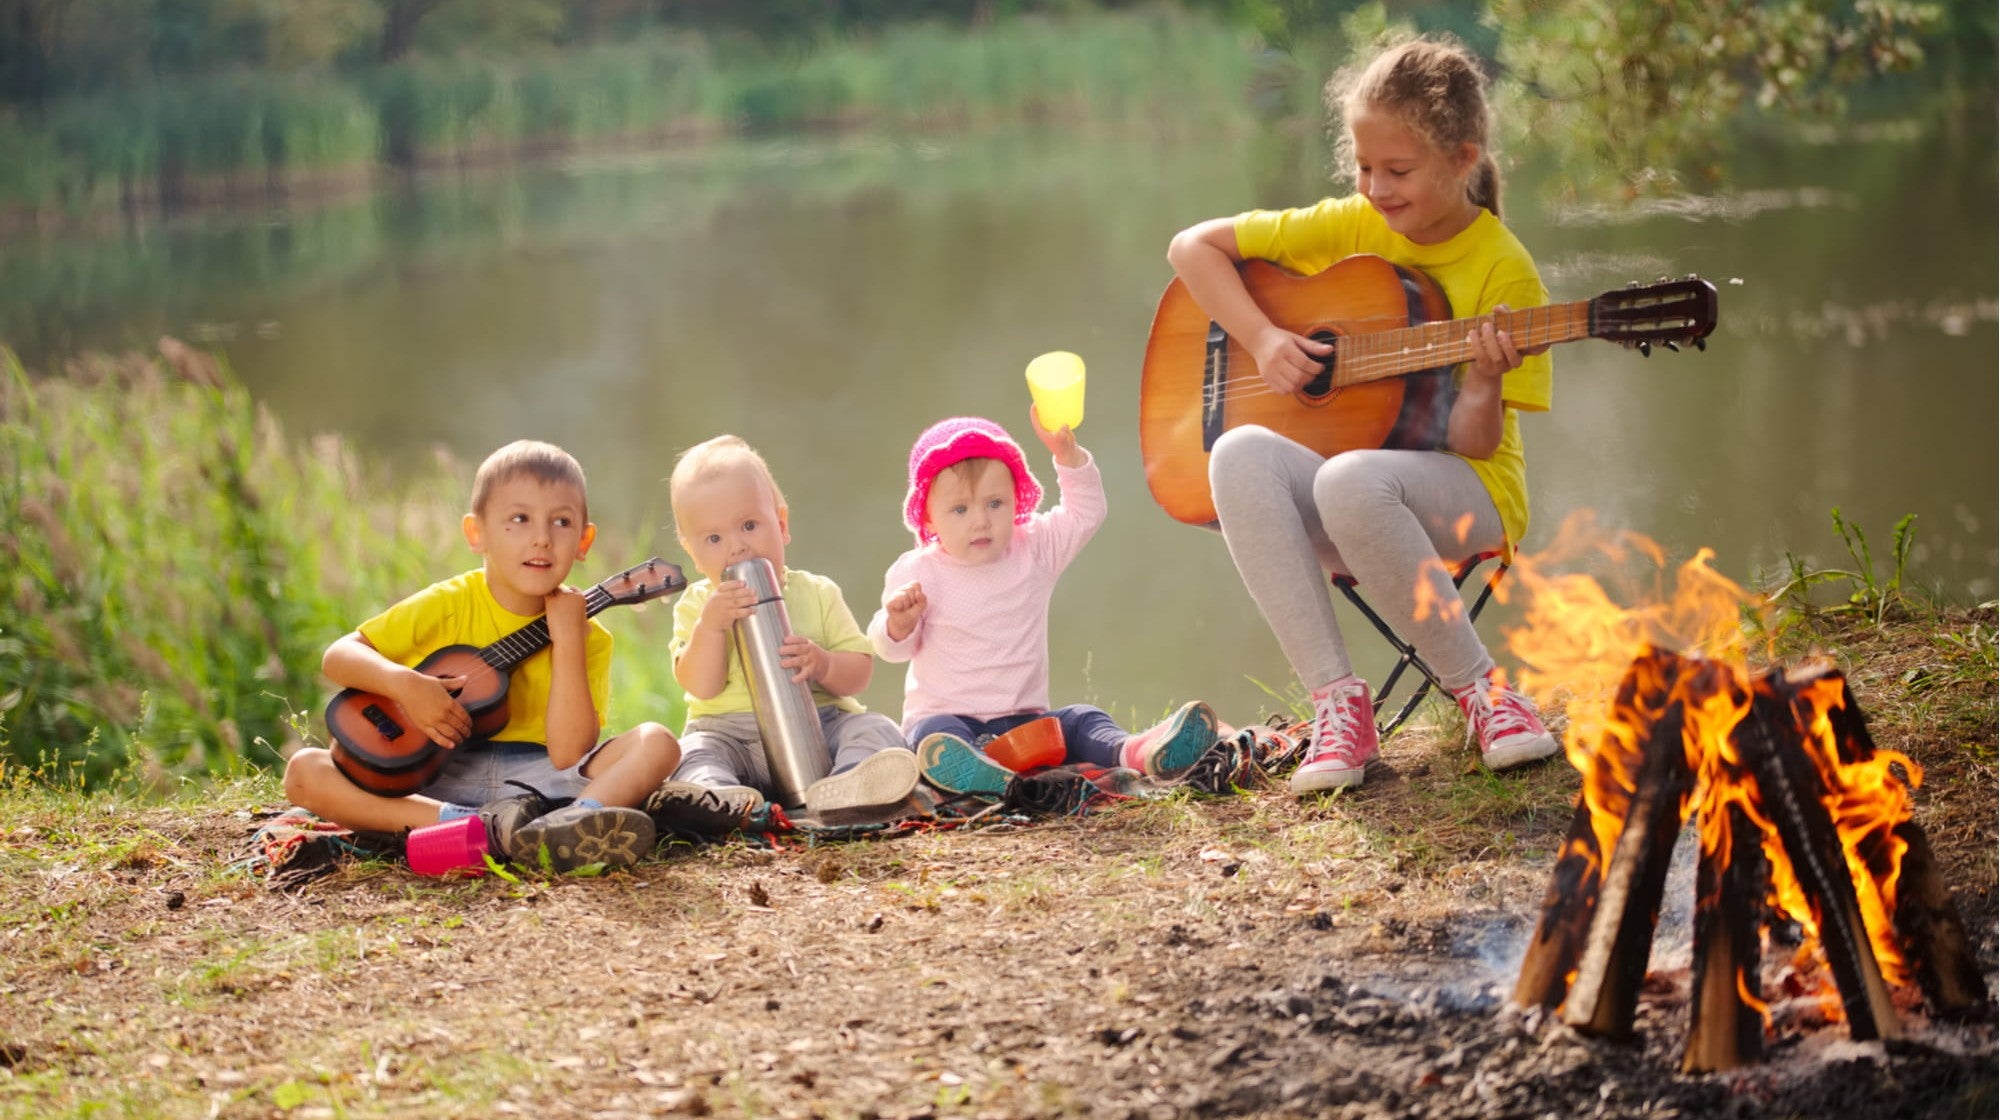 12 Camp Songs For Kids To Sing Around The Campfire